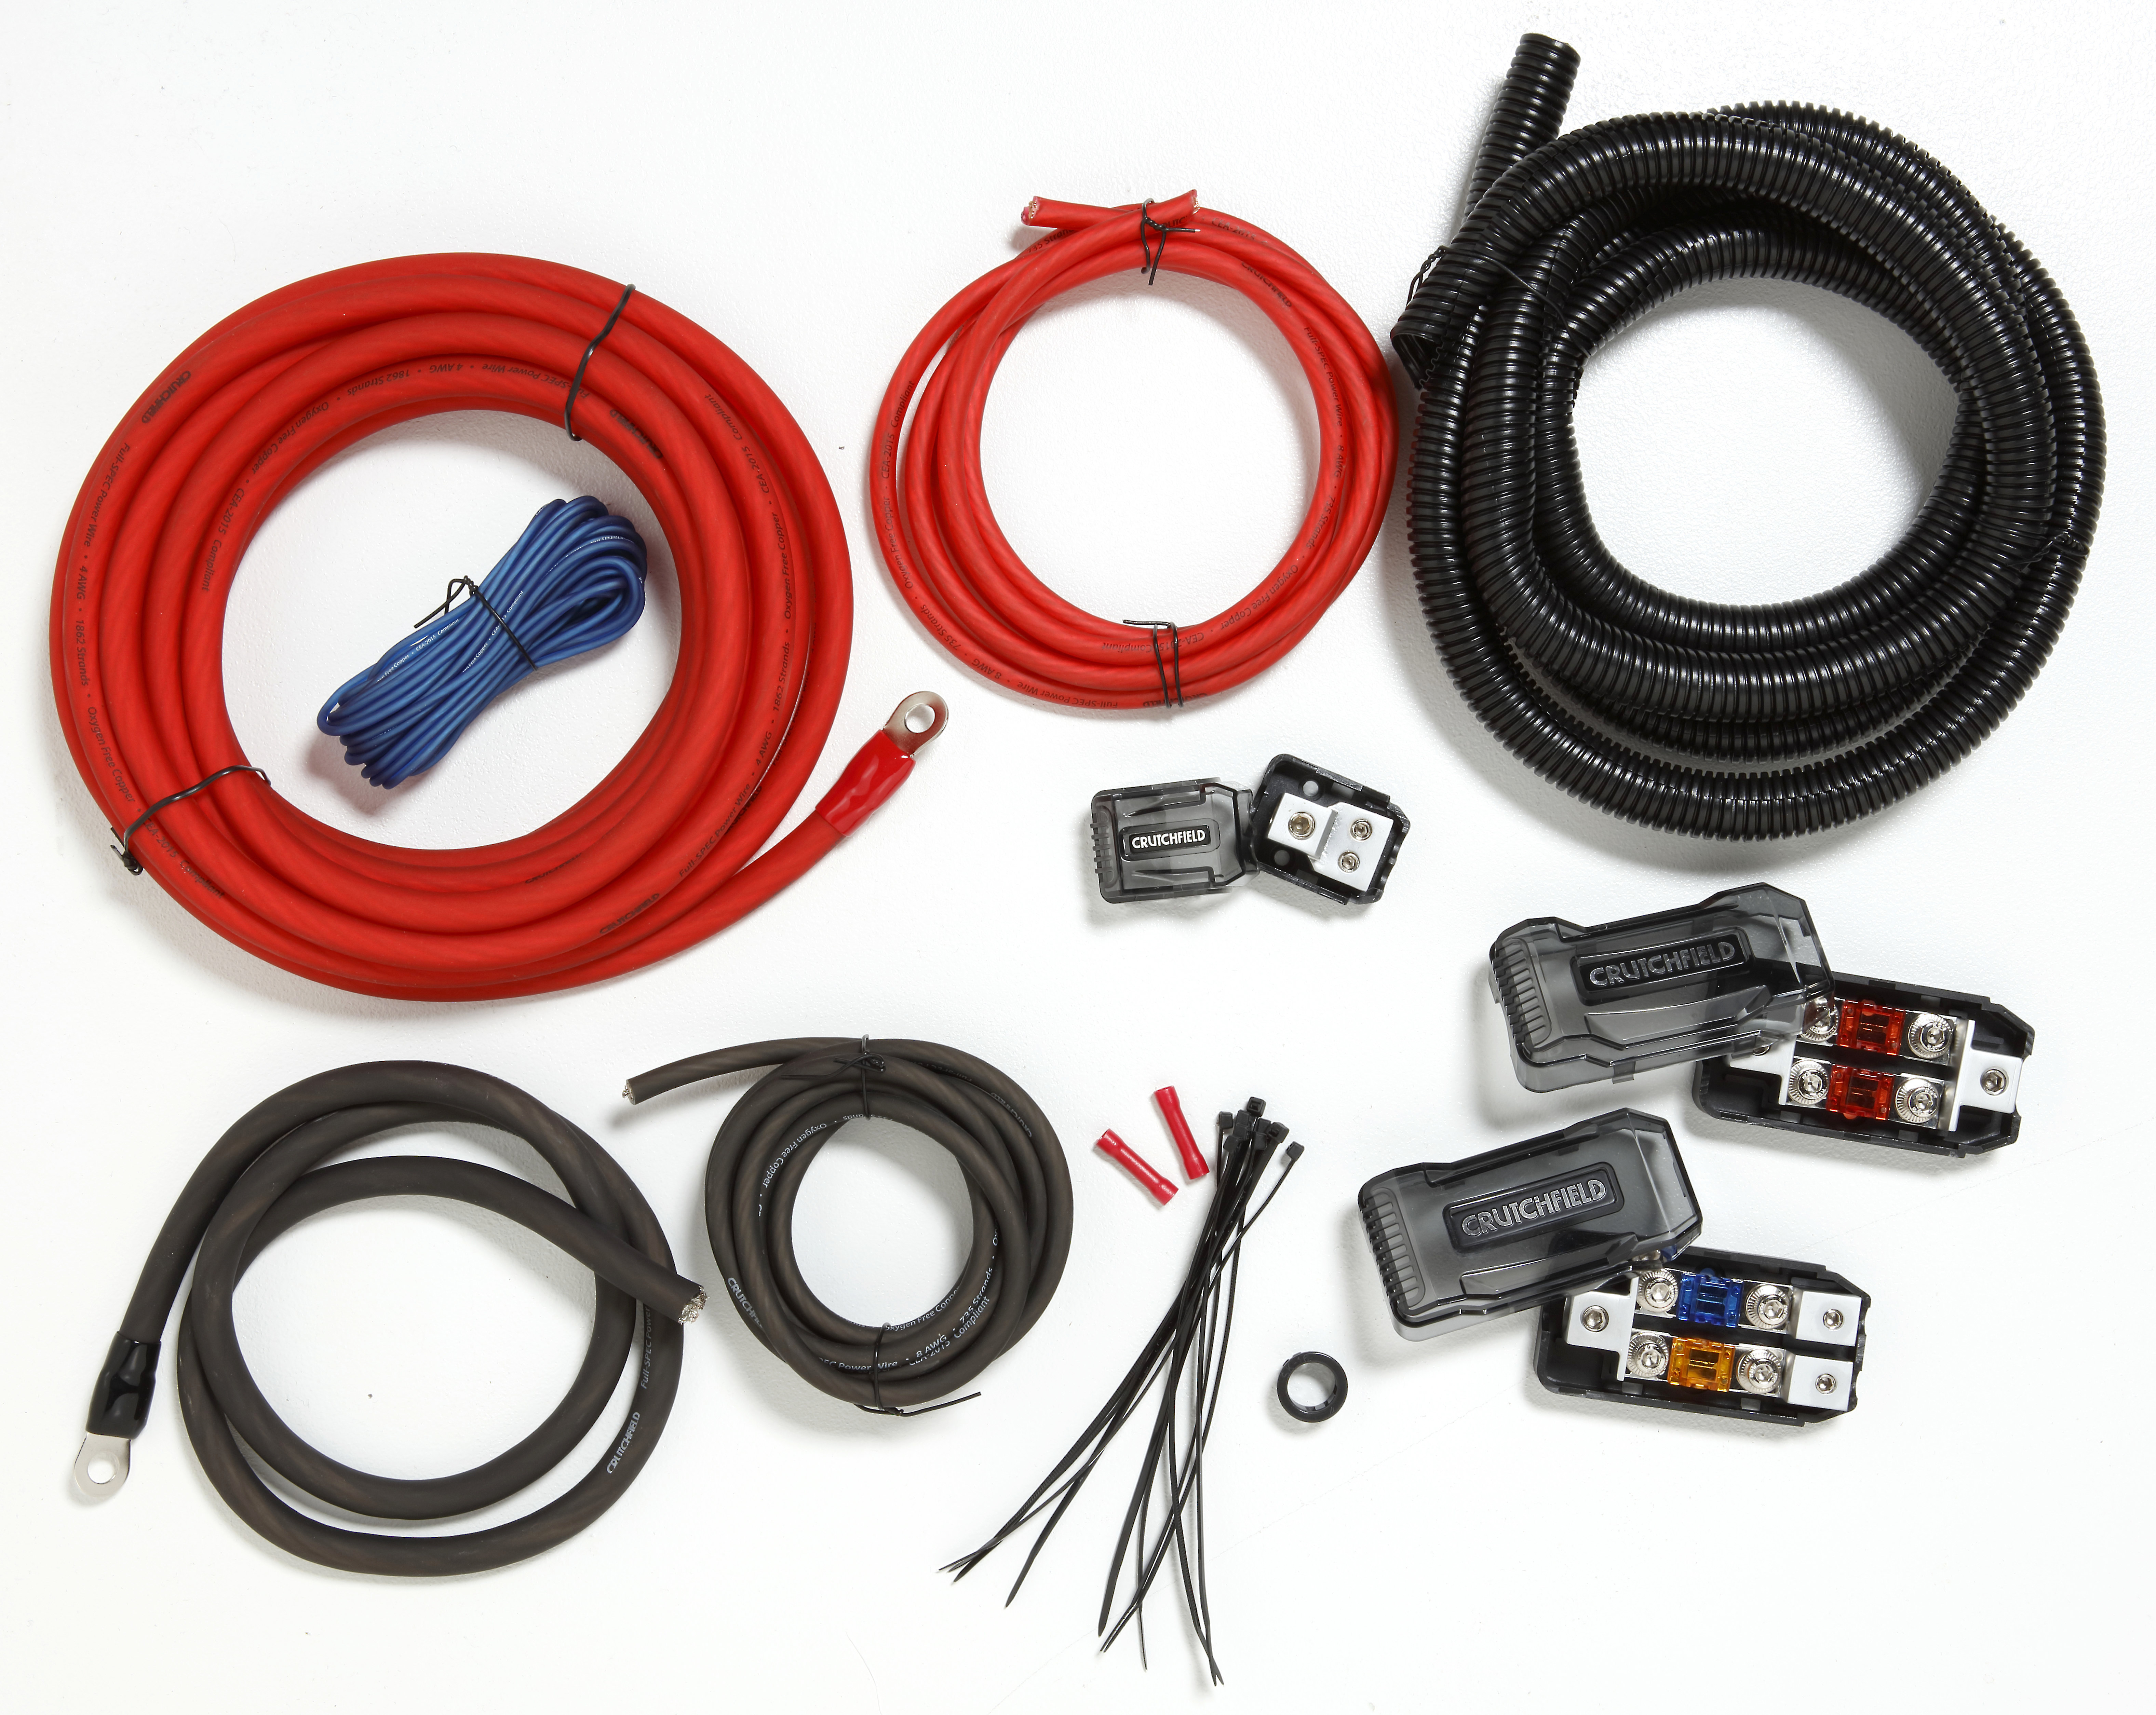 4 Gauge Amp Kit Amplifier Install Wiring Complete 4 Ga Installation Cables 2200W 